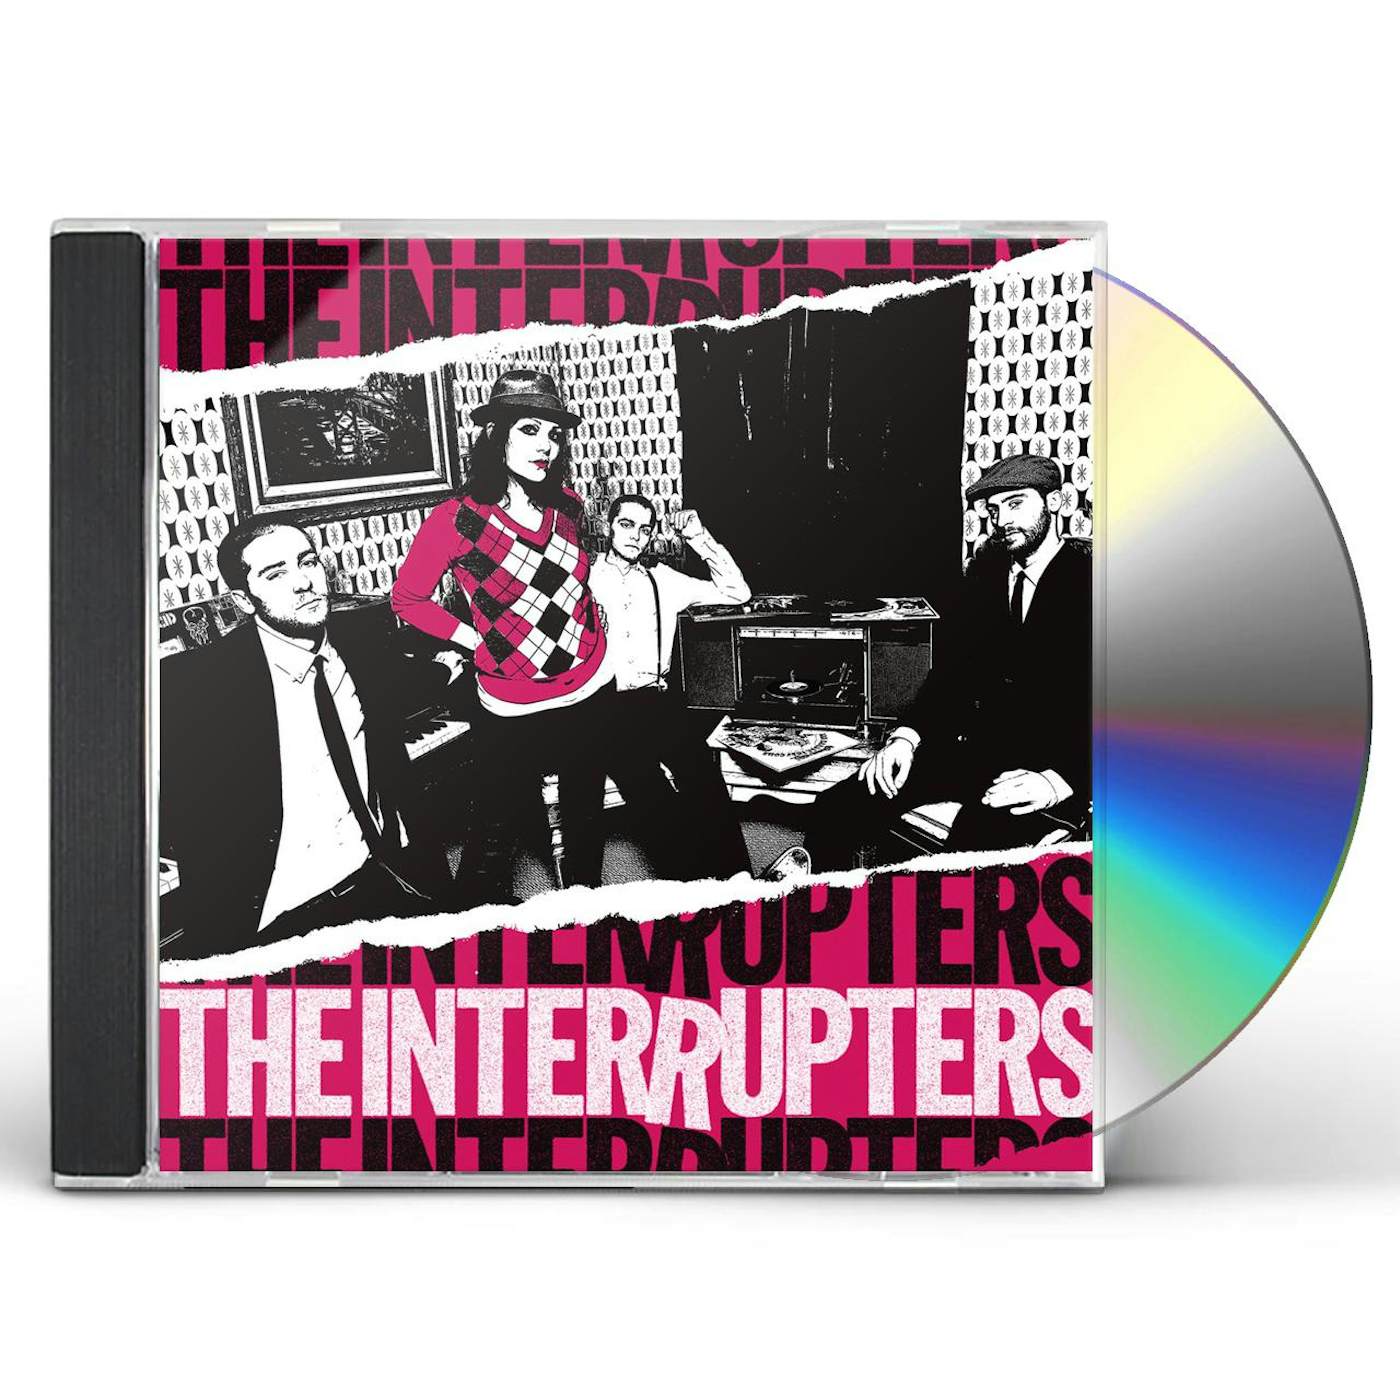 The Interrupters CD